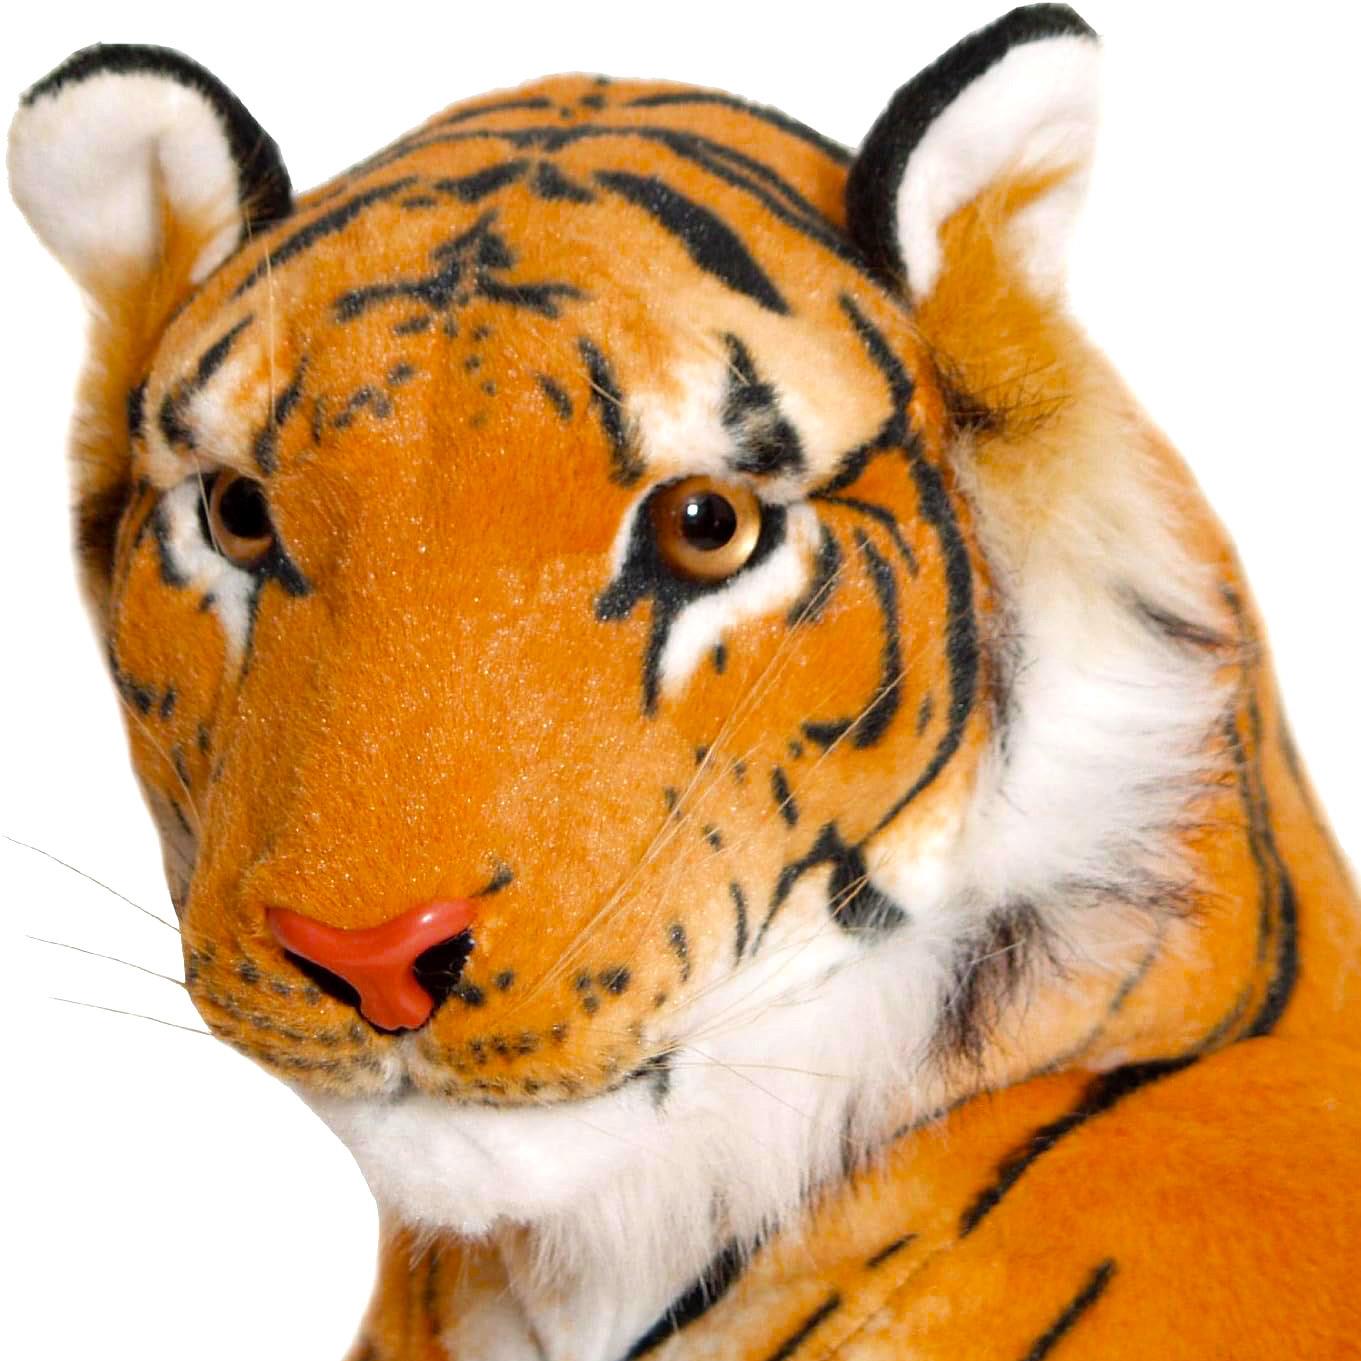 Small Bengal Tiger Soft Plush Toy by The Magic Toy Shop - UKBuyZone